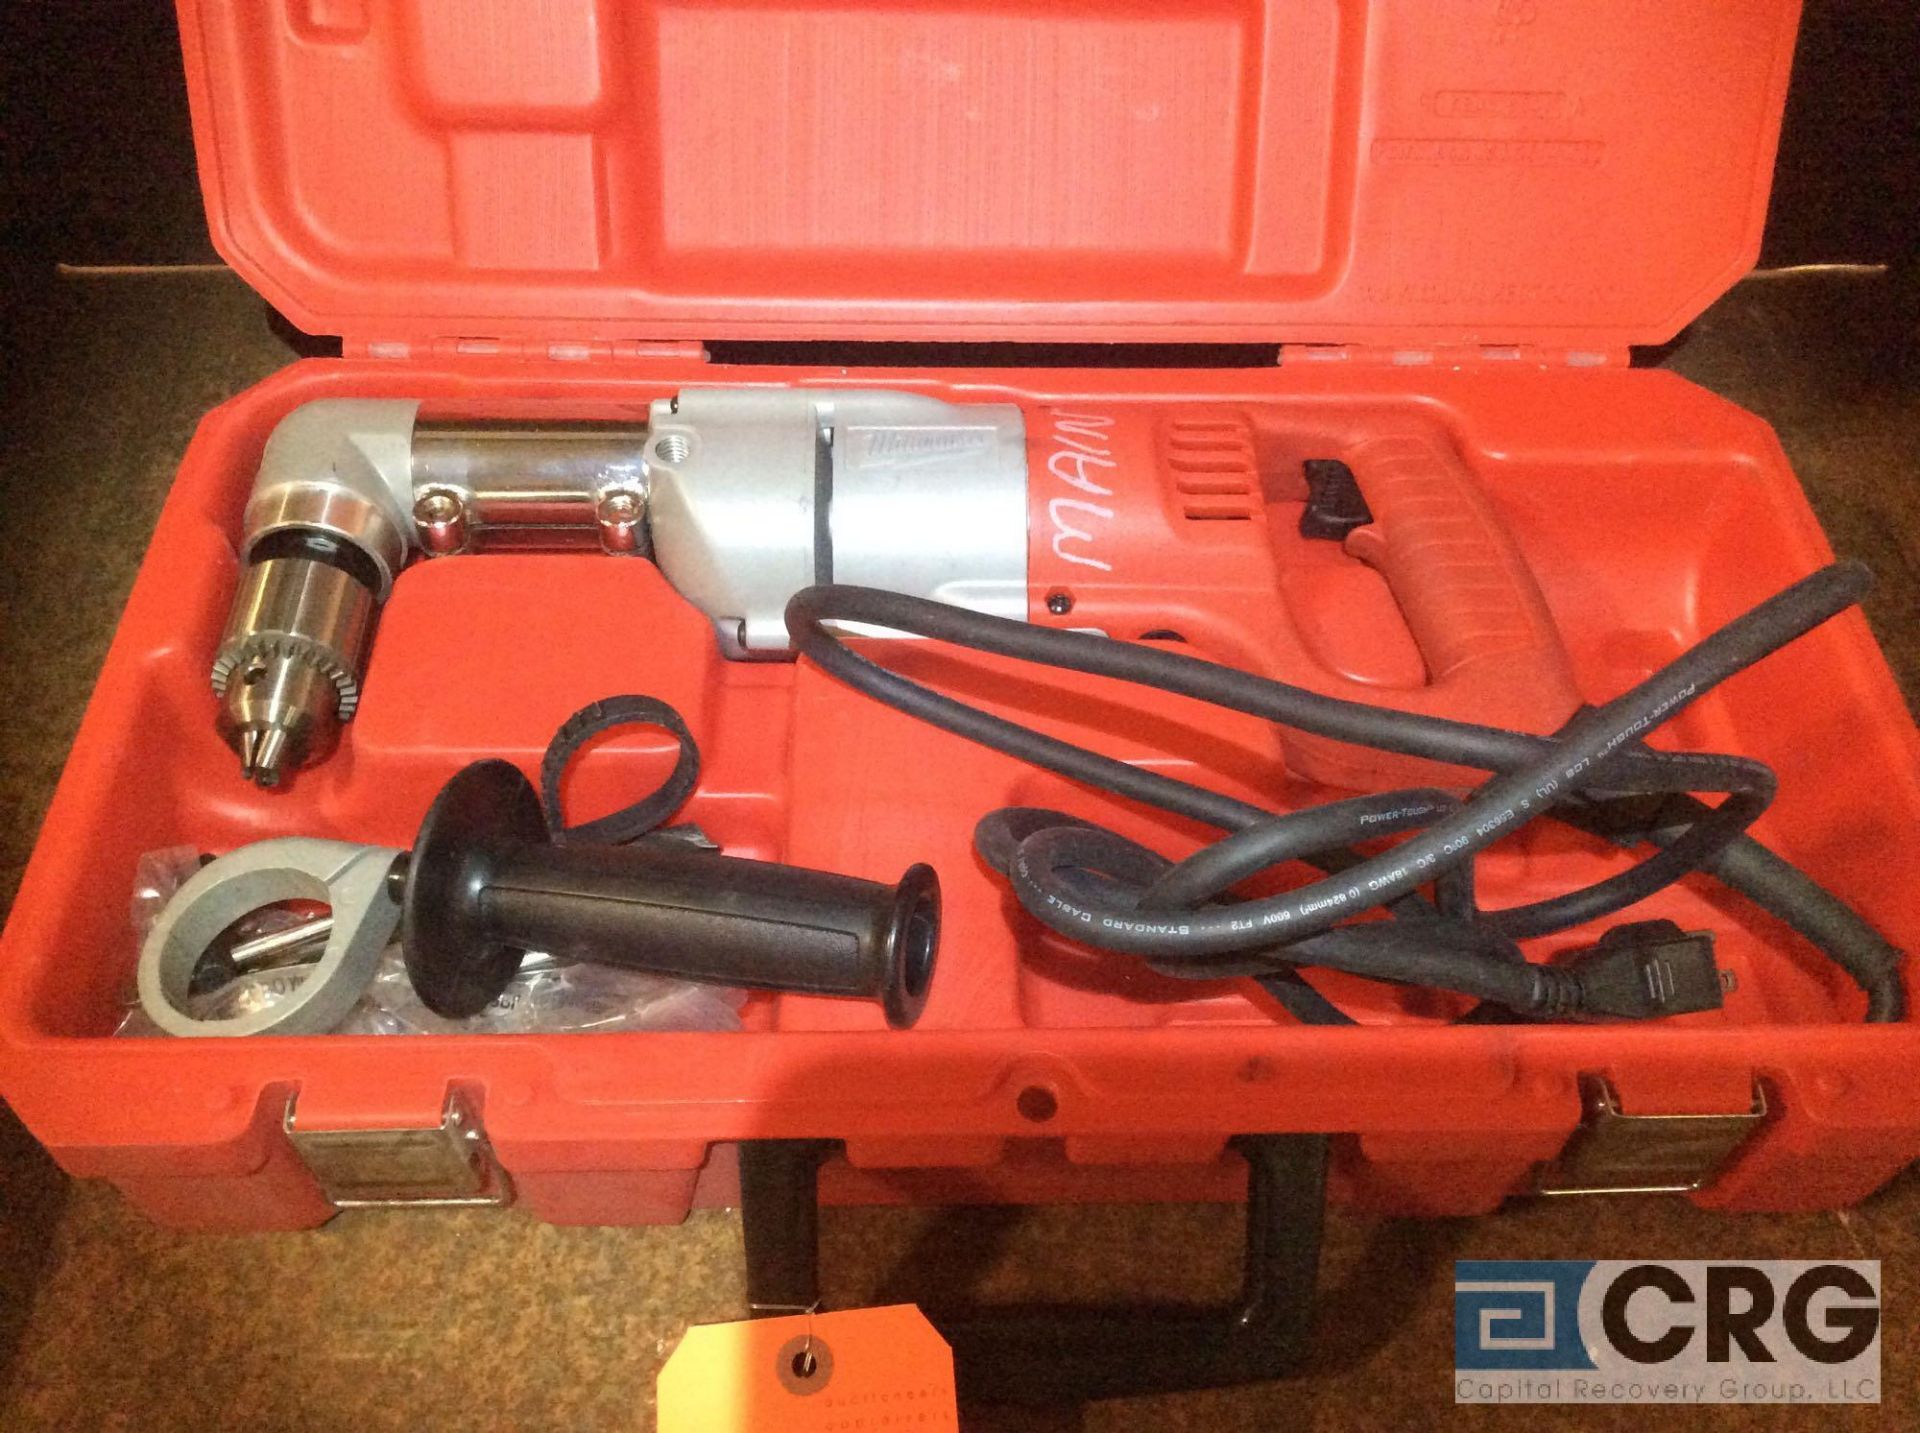 Milwaukee 1/2 inxh heavy duty right angle drill with case (LIKE NEW CONDITION) - Image 2 of 2